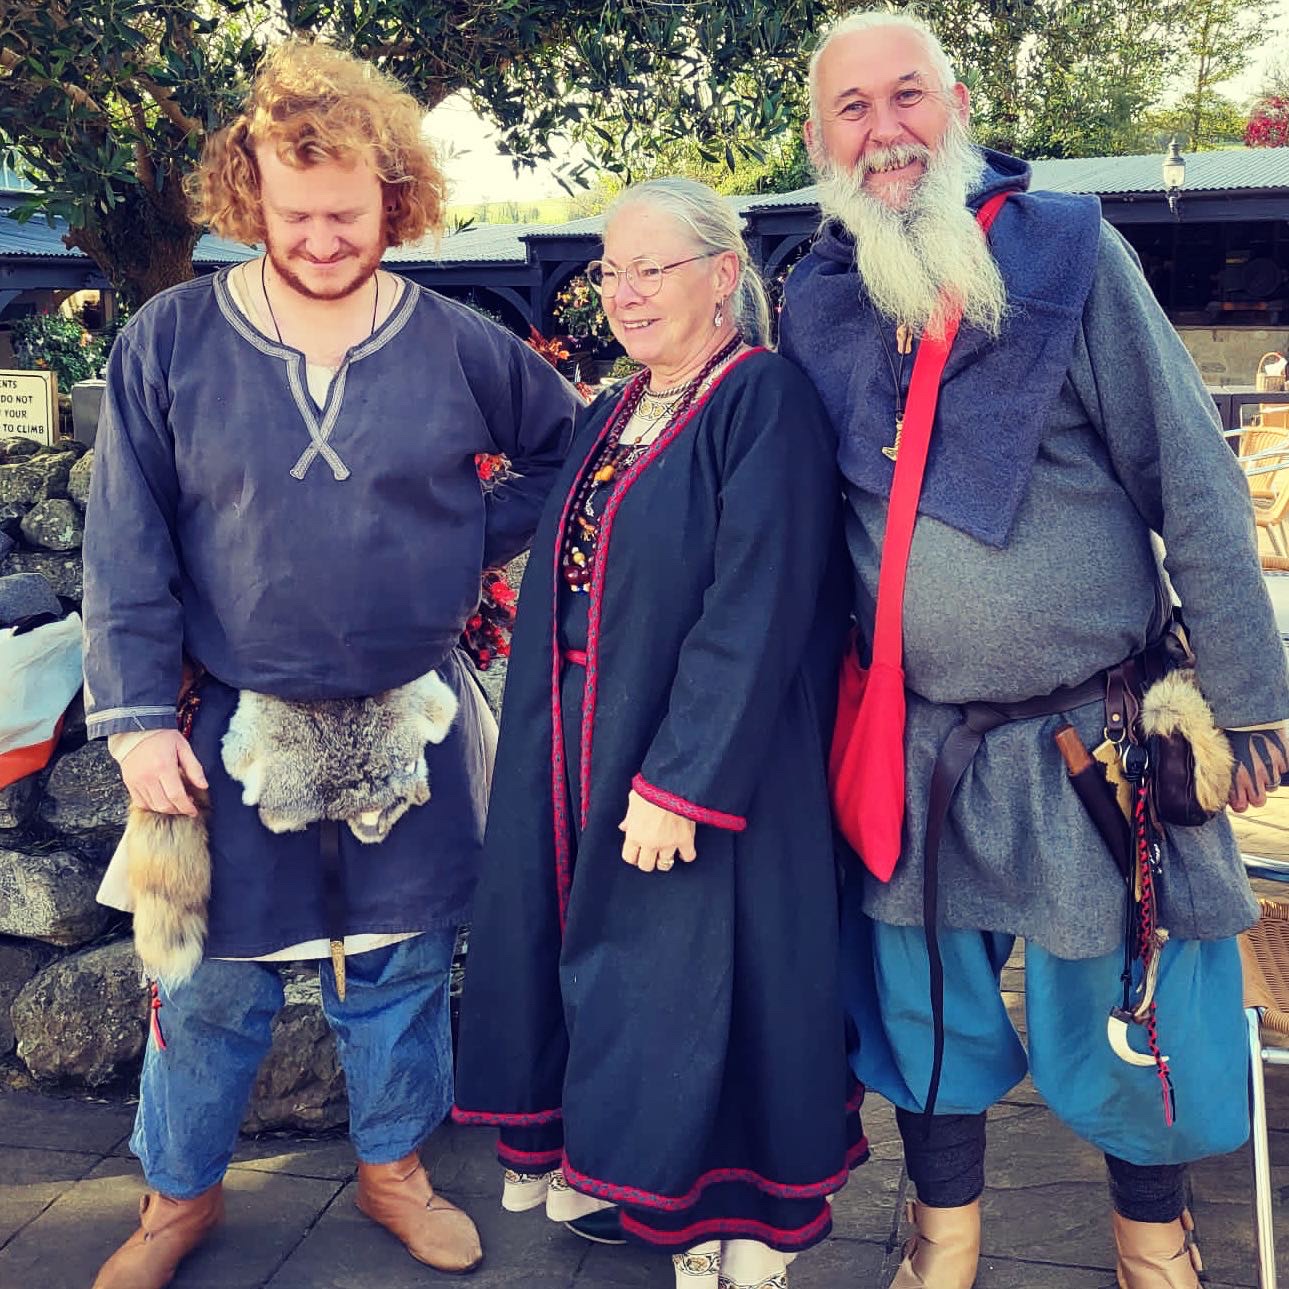 Three Viking reenactment players, Rekr, Mutter Maia, and Habard stand together by a tree. They wear traditional garb and accessories in blues and greys, with flashes of bright red. Hanging from their belts can be seen weapons, pouches, tools, and furs.